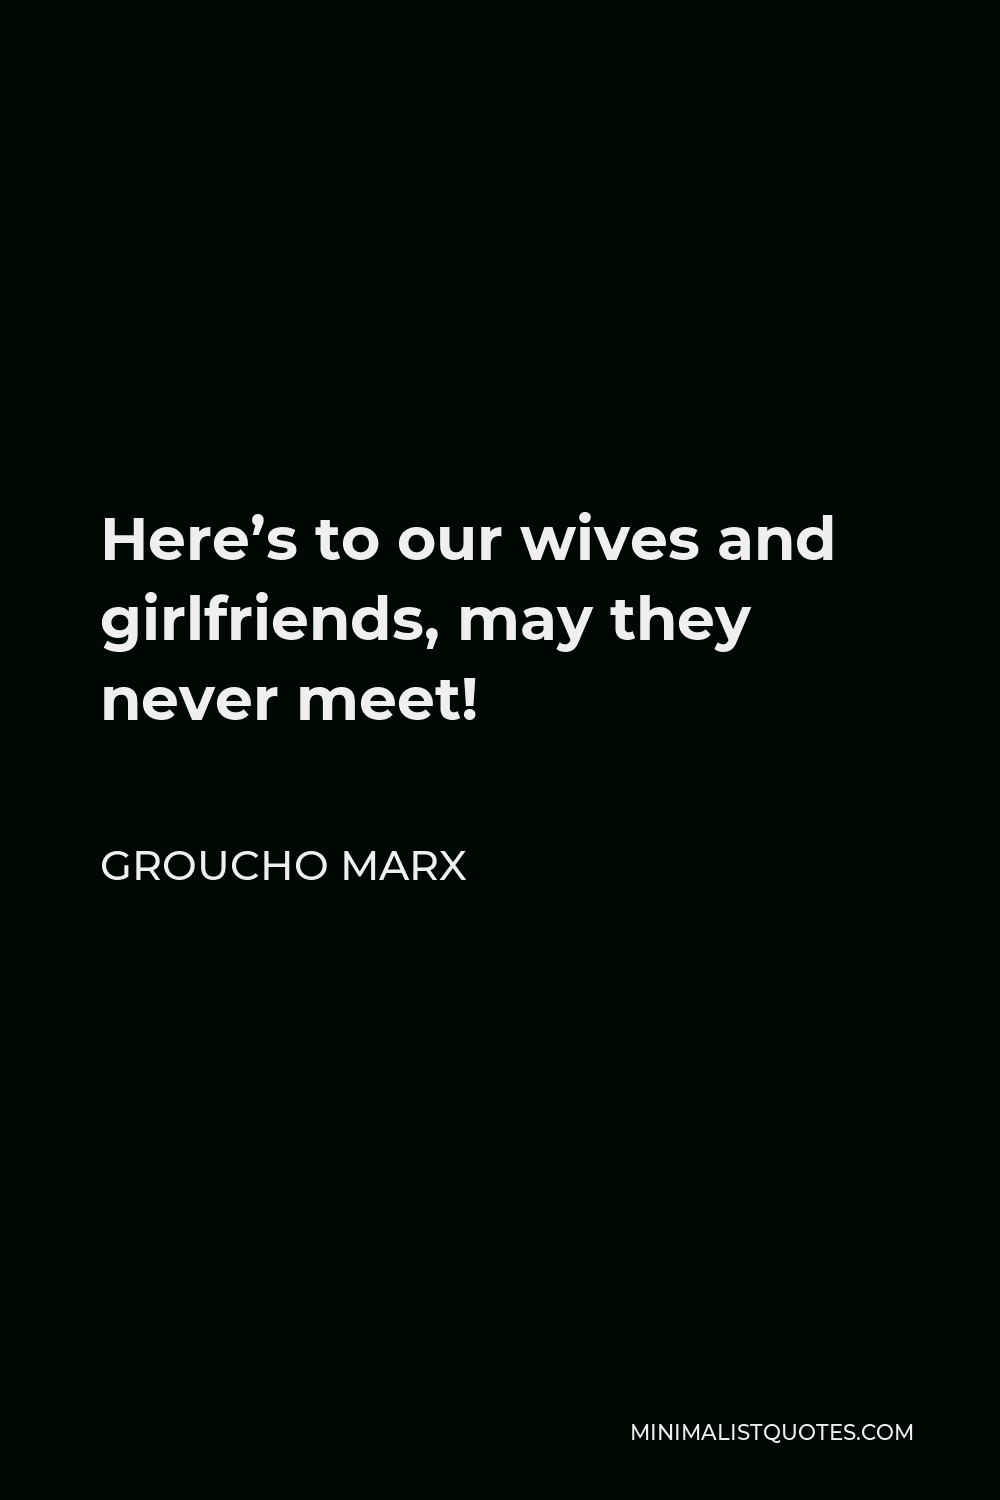 Groucho Marx Quote - Here’s to our wives and girlfriends, may they never meet!